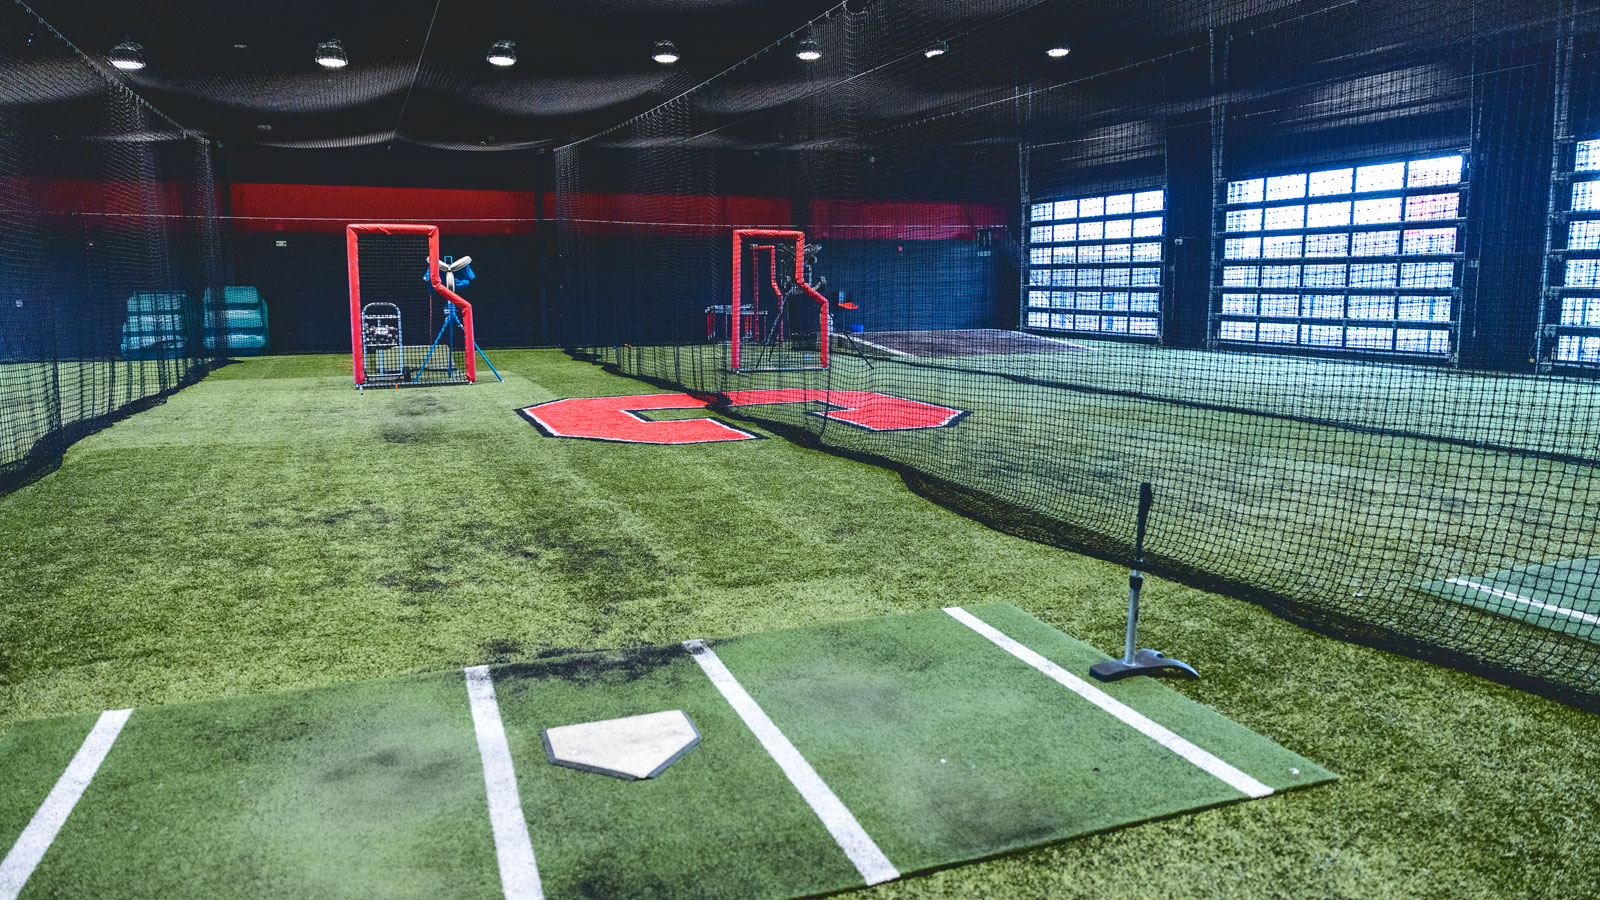 A view of the batting cages at Cornell‘s Booth Field that were built with the turf from the former Hoy Field